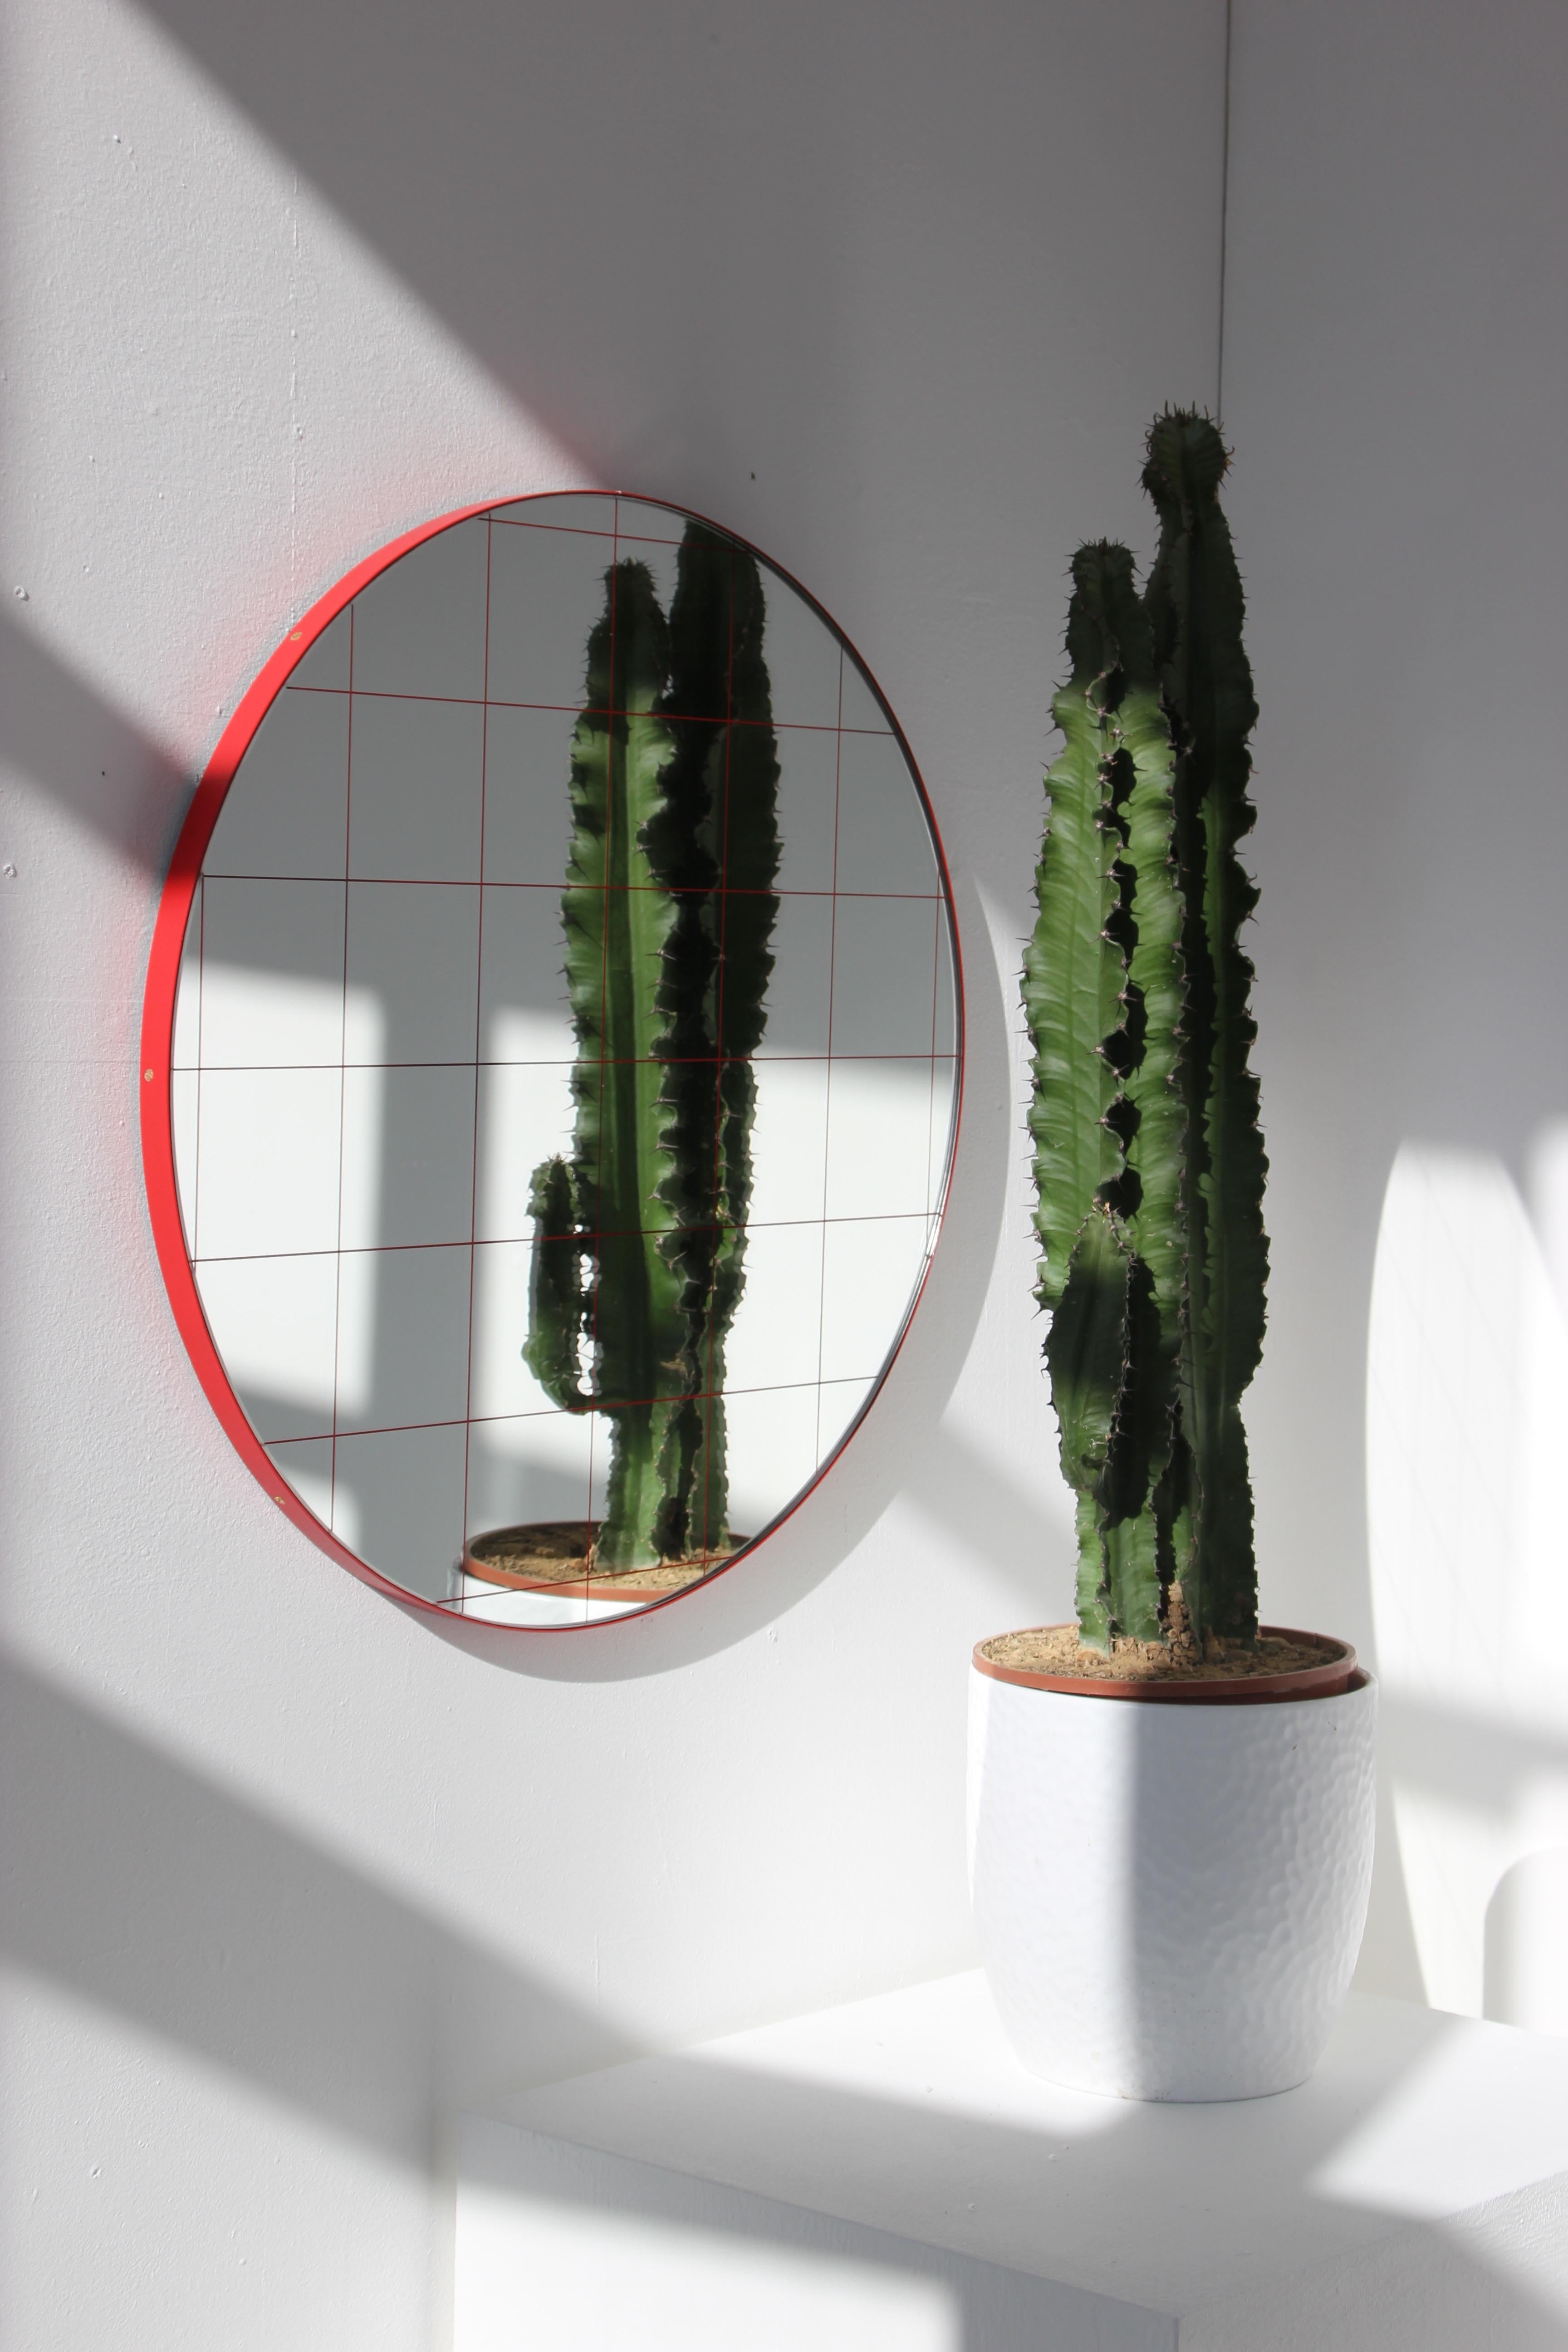 Modern decorative round Orbis mirror with a red grid and a powder coated red frame. Designed and handcrafted in London, UK.

All mirrors are fitted with an ingenious French cleat (split batten) system so they may hang flush with the wall in four